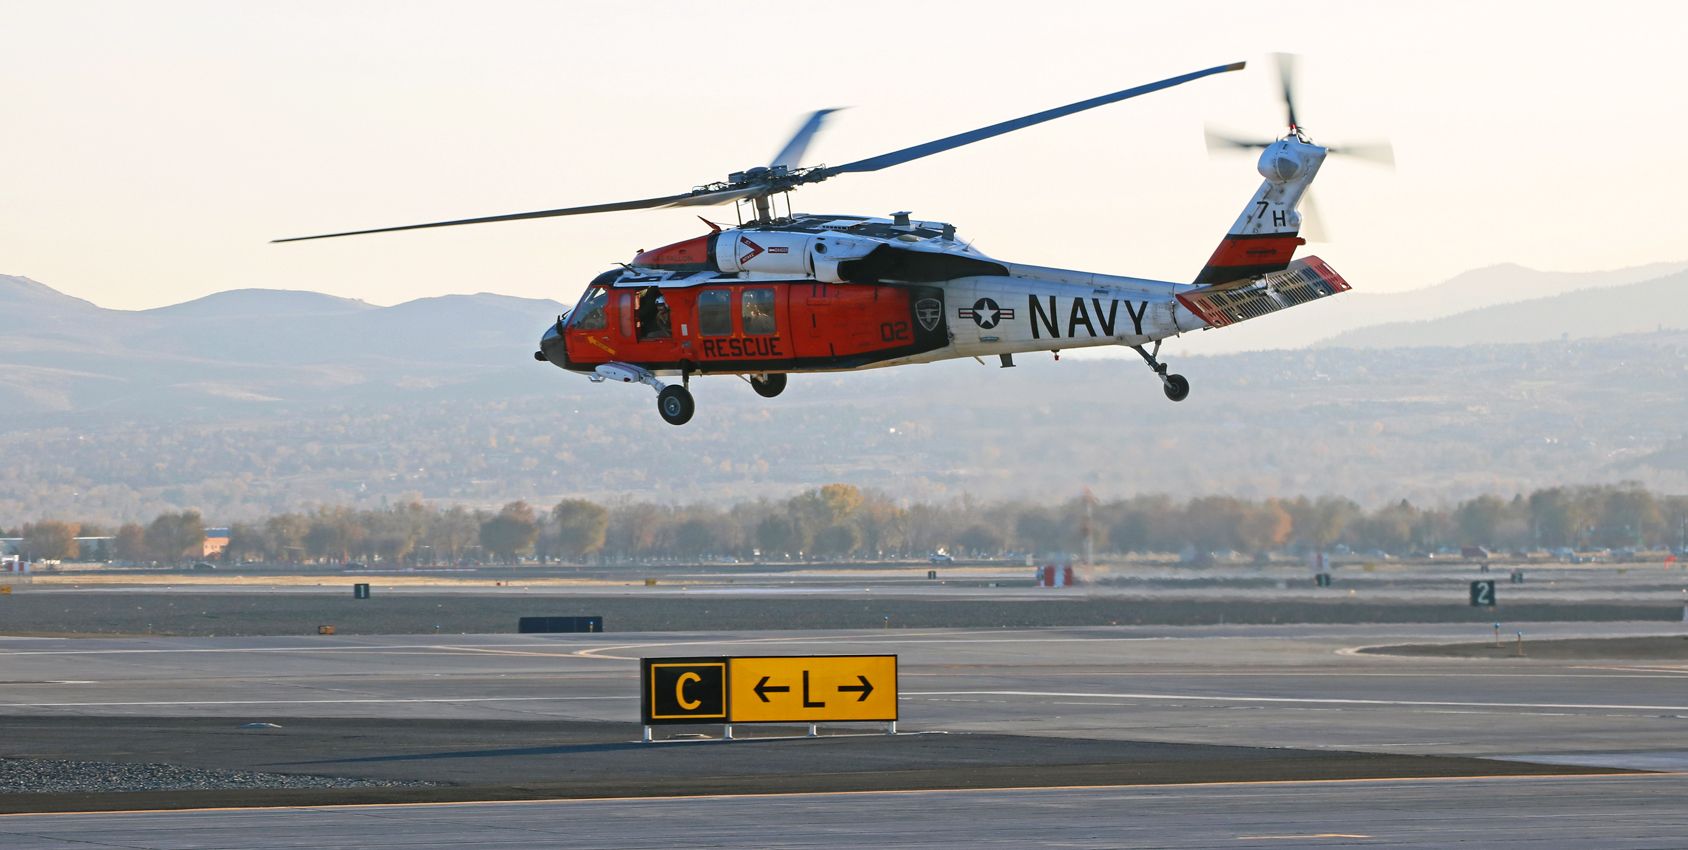 Sikorsky S-70 (16-5760) - The long shadow on the ground next to the taxiway sign gives a good indication of the time of day as Longhorn Oh Two (US Navy "Longhorns" Search and Rescue Team) lifts away from Lima during the sunset hour and begins turning east to make a short return trip to NAS Fallon.